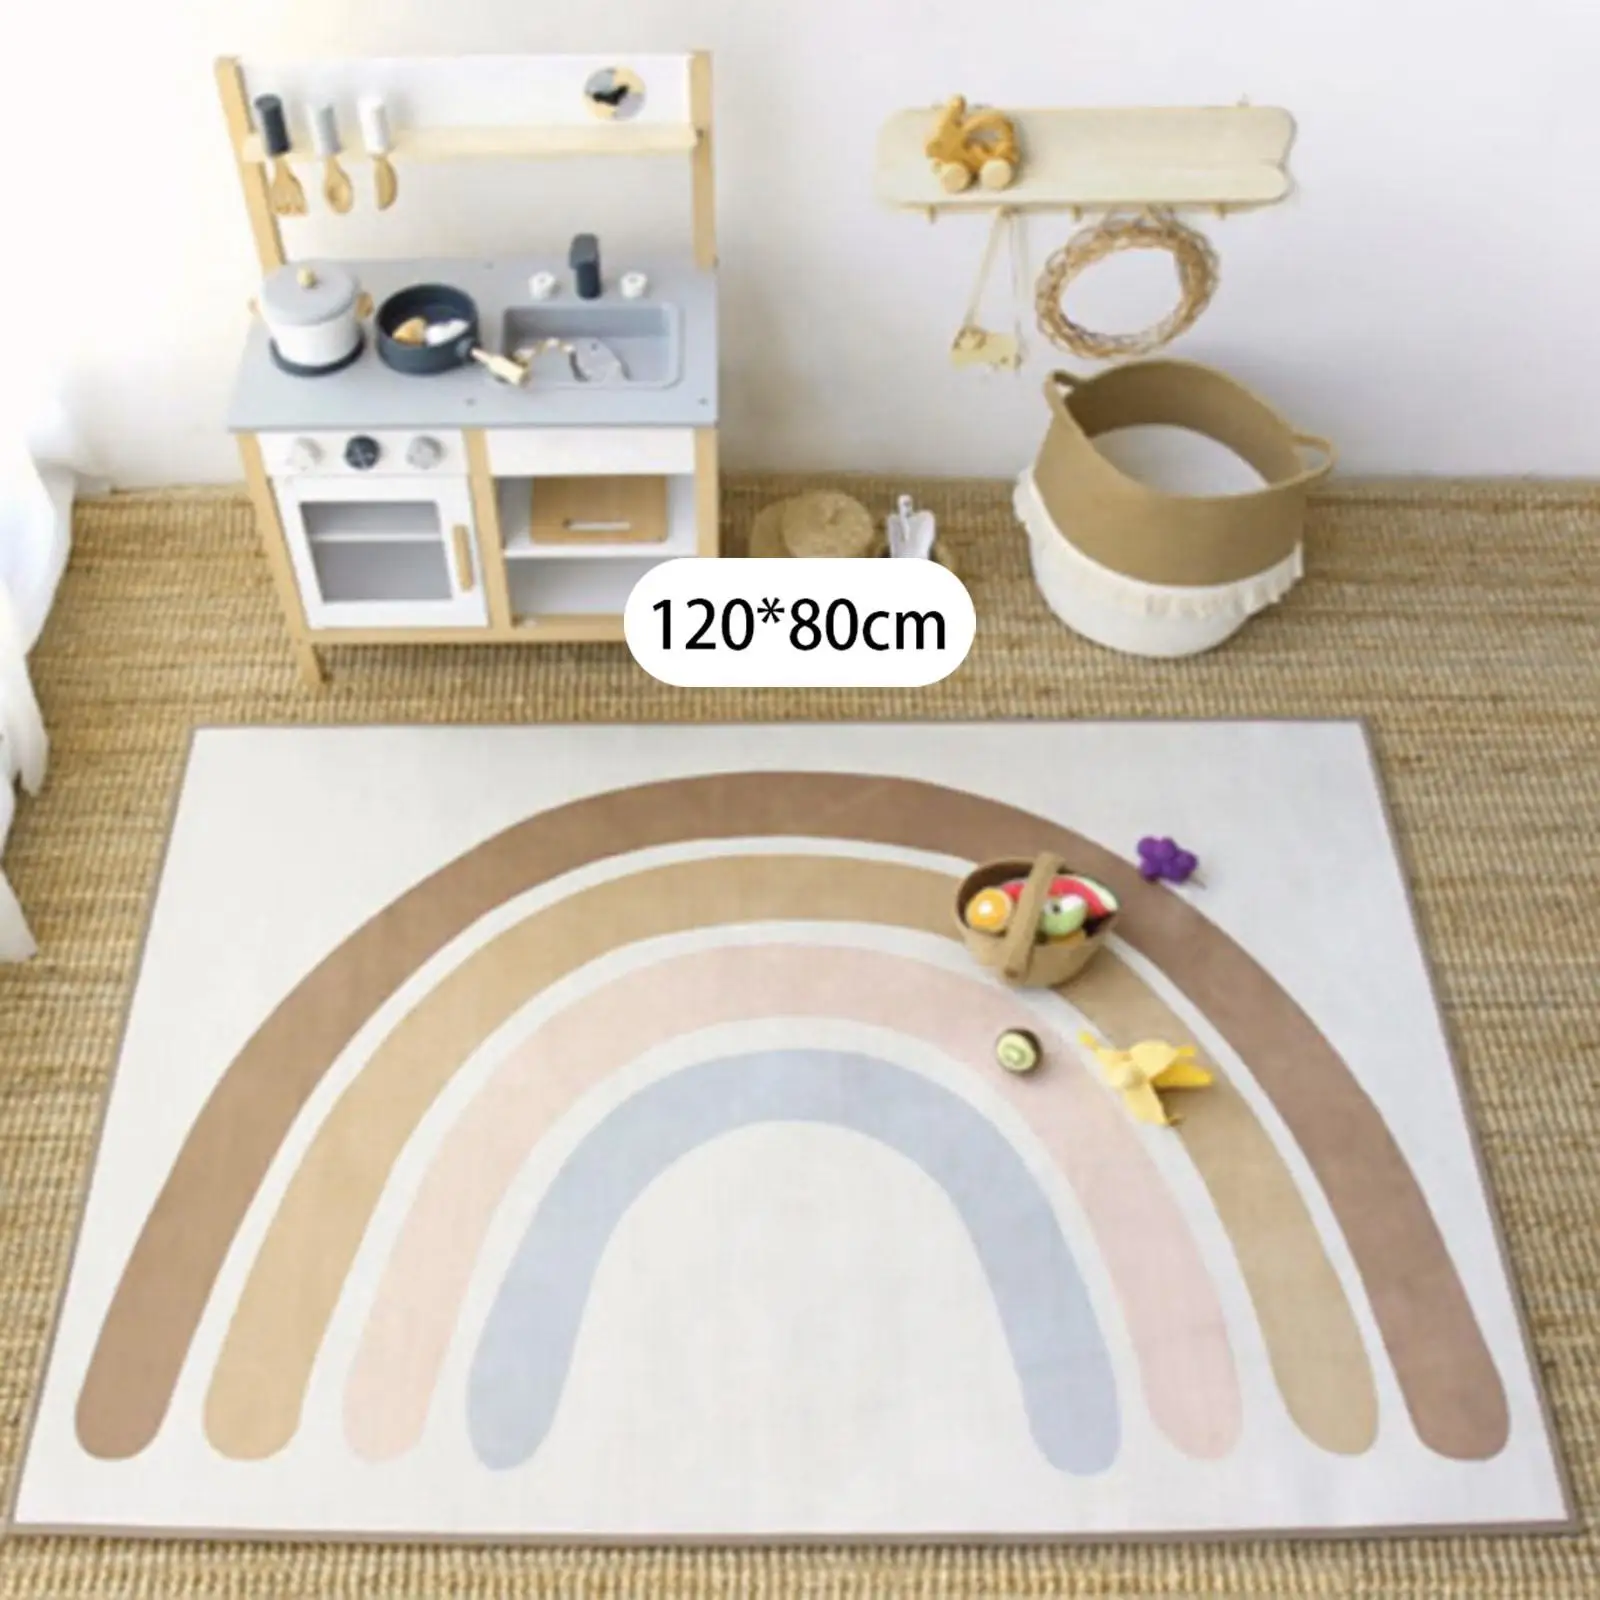 Collapsible  Carpet, Photography Props Play Mat for Bedroom Children